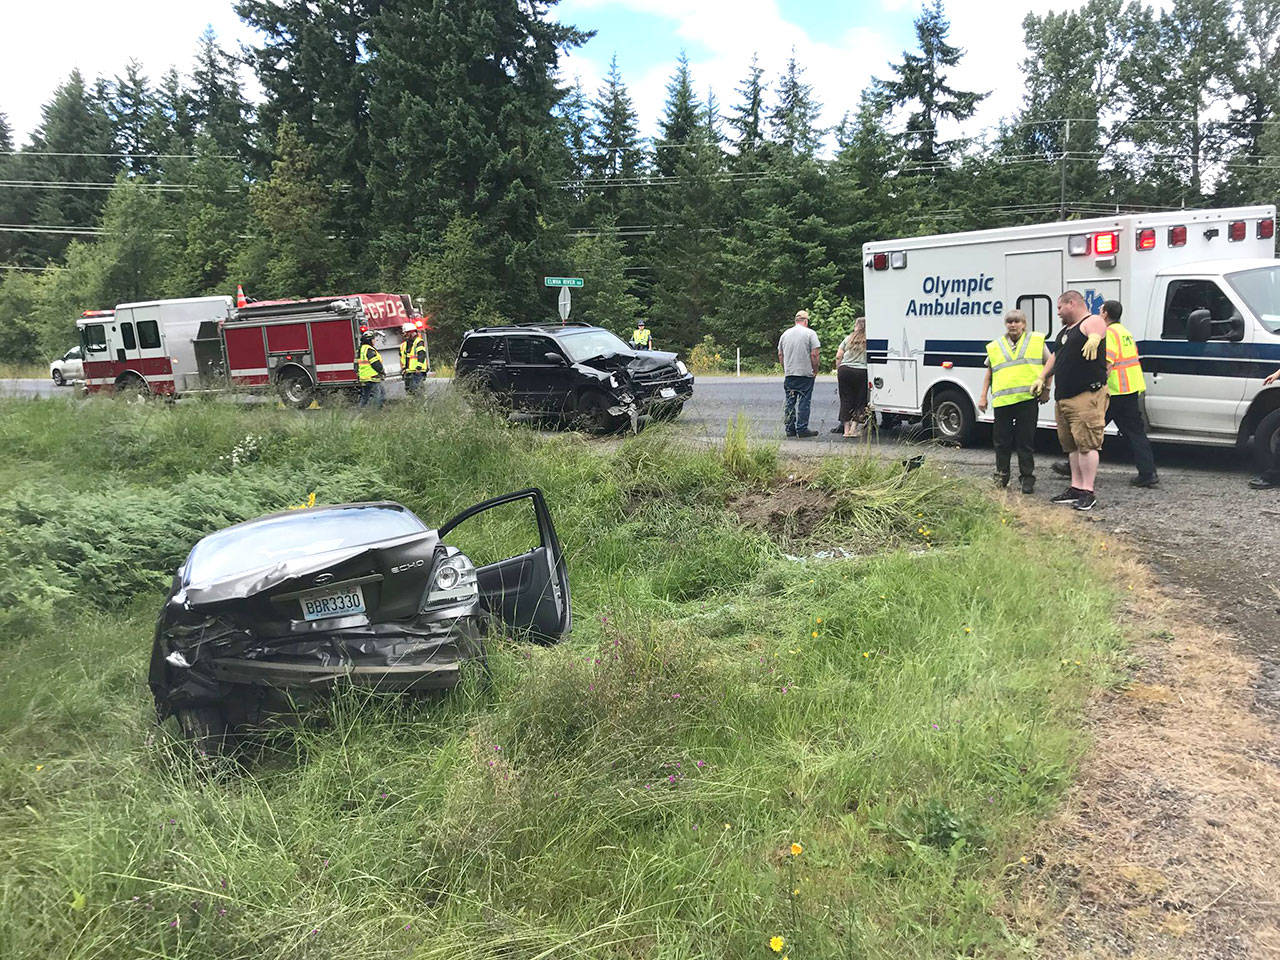 Port Angeles Police Department off-duty officers are credited with helping the victims of a Sunday afternoon collision on Highway 112. (Port Angeles Police Department)